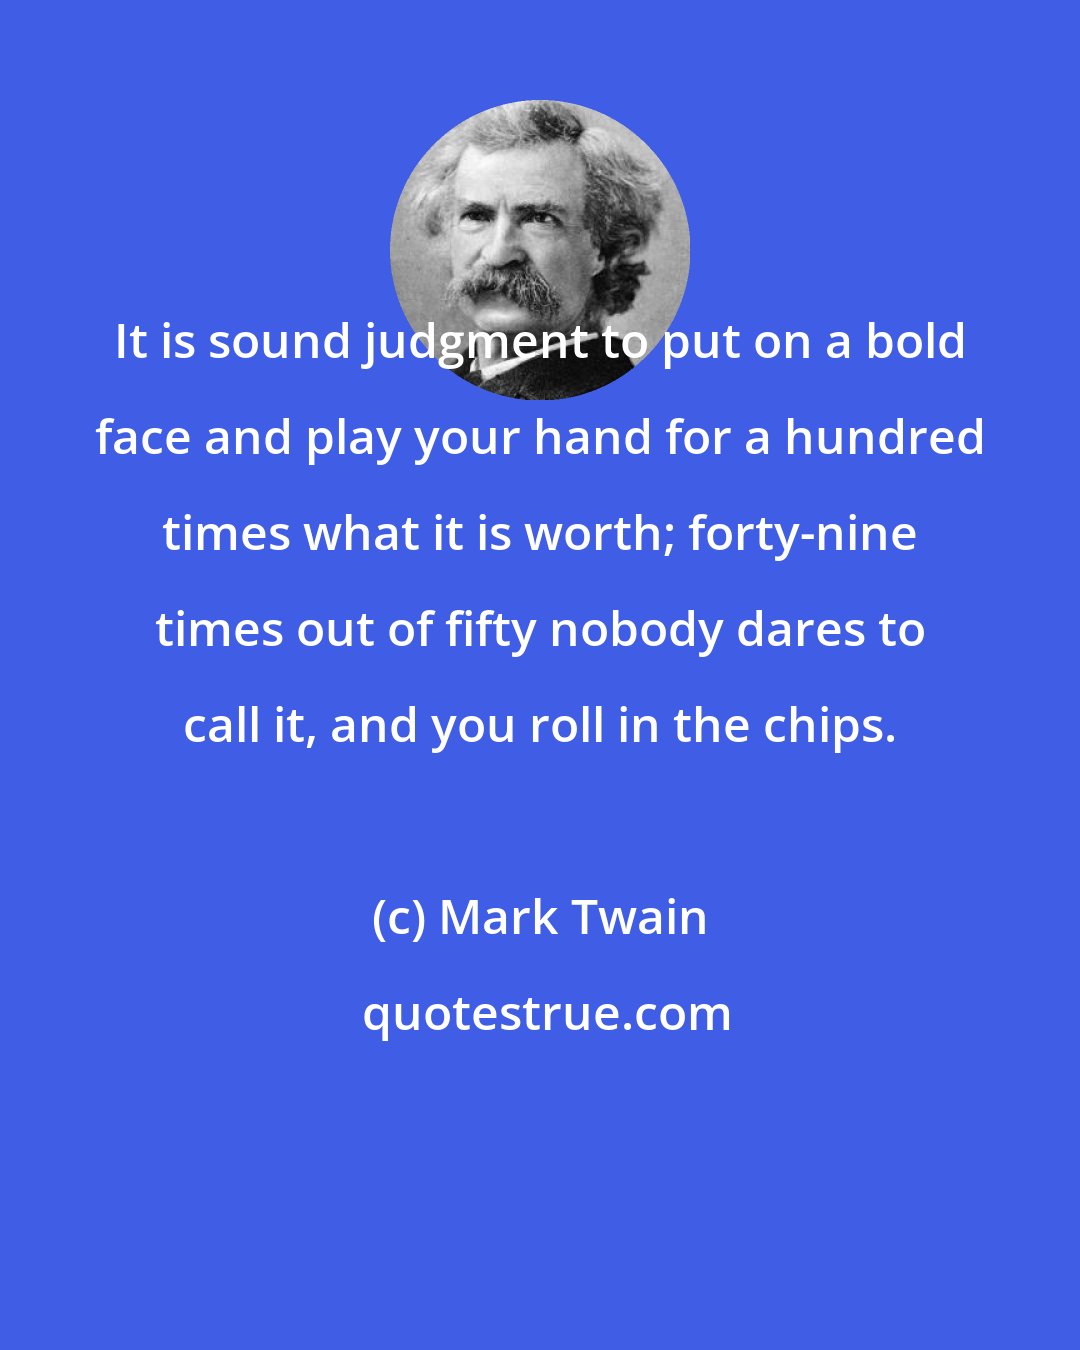 Mark Twain: It is sound judgment to put on a bold face and play your hand for a hundred times what it is worth; forty-nine times out of fifty nobody dares to call it, and you roll in the chips.